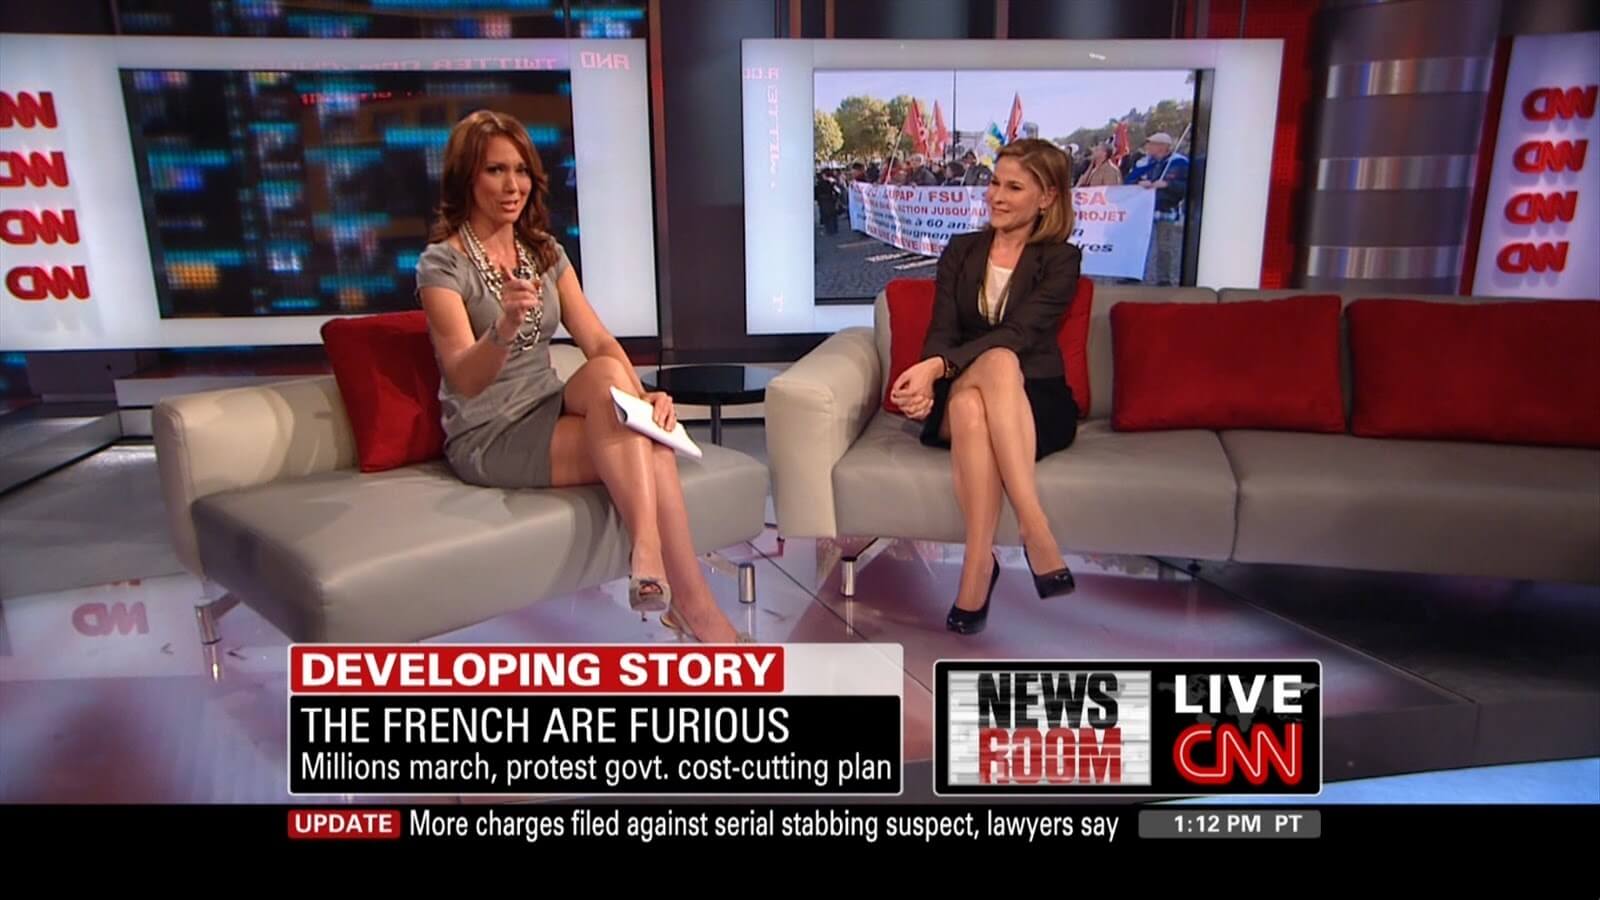 41 Brooke Baldwin Nude Pictures Can Leave You Flabbergasted 53